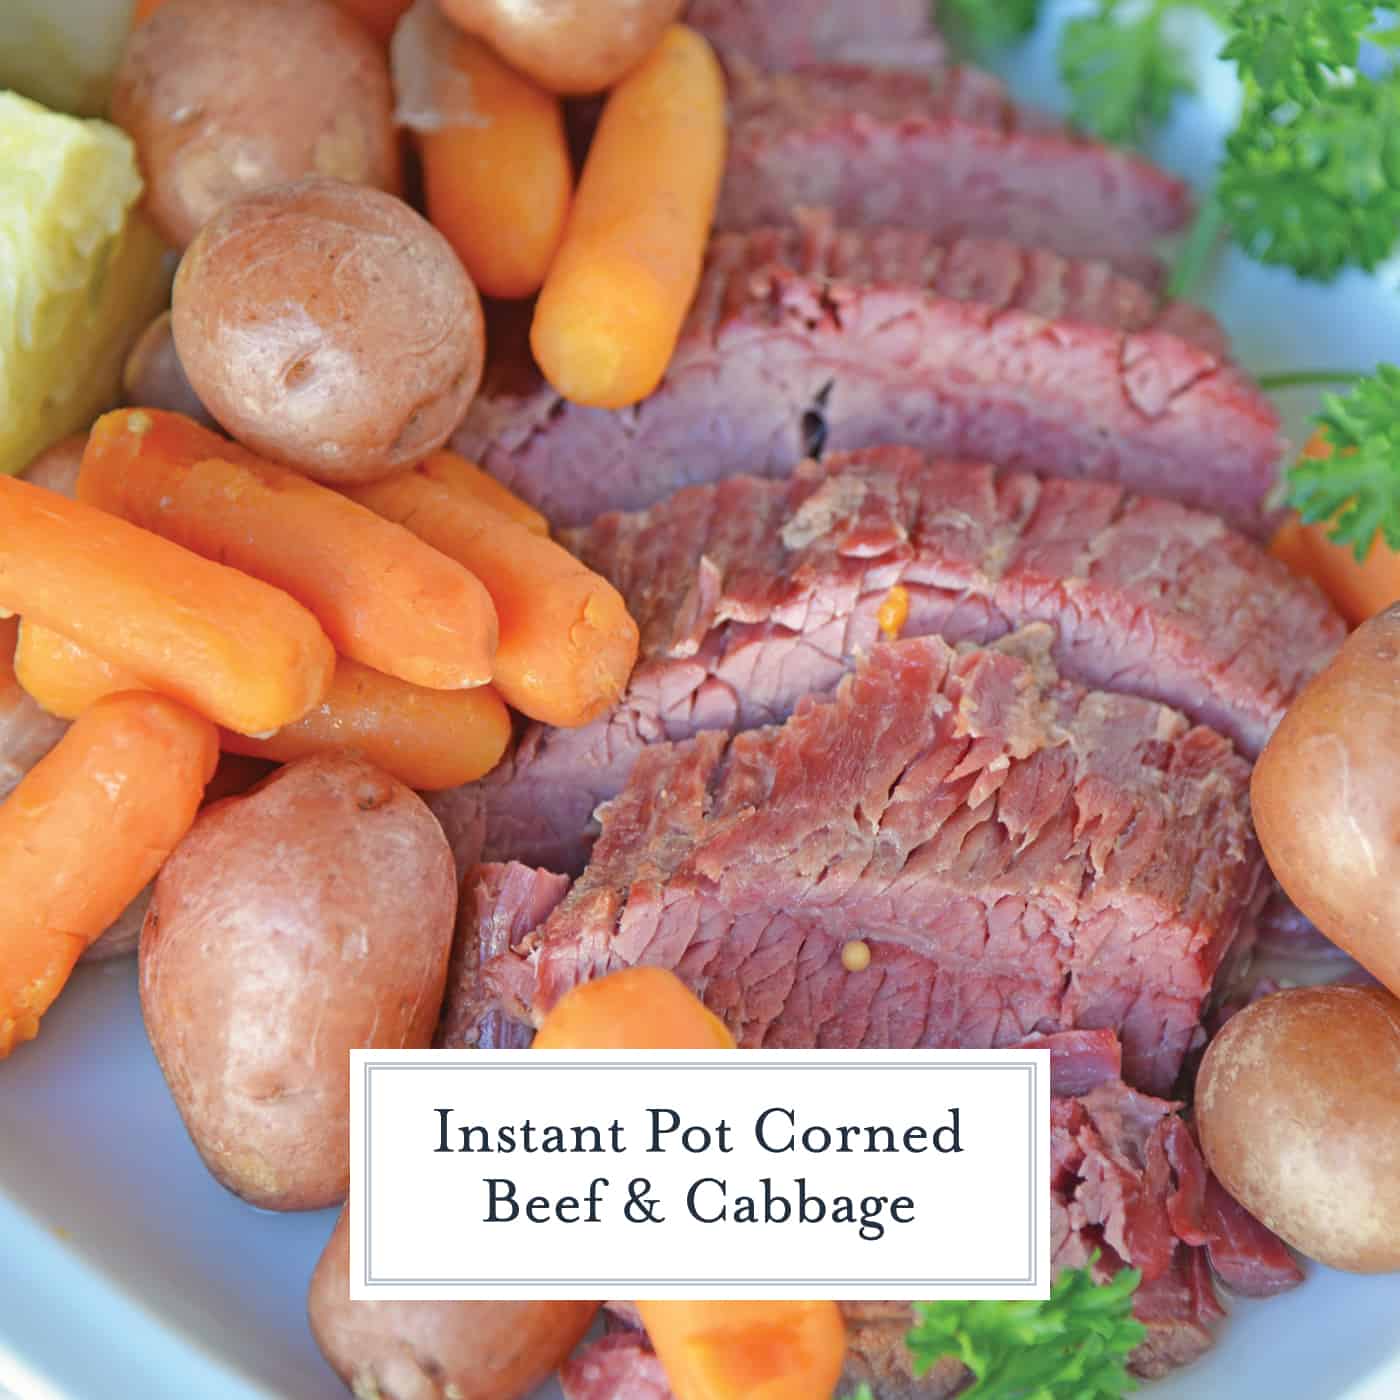 Instant Pot Corned Beef and Cabbage is the best way to prepare brisket. Fork tender meat made with a delicious spice blend and root vegetables. #cornedbeefandcabbage #instantpotcornedbeef #pressurecookercornedbeef www.savoryexperiments.com 